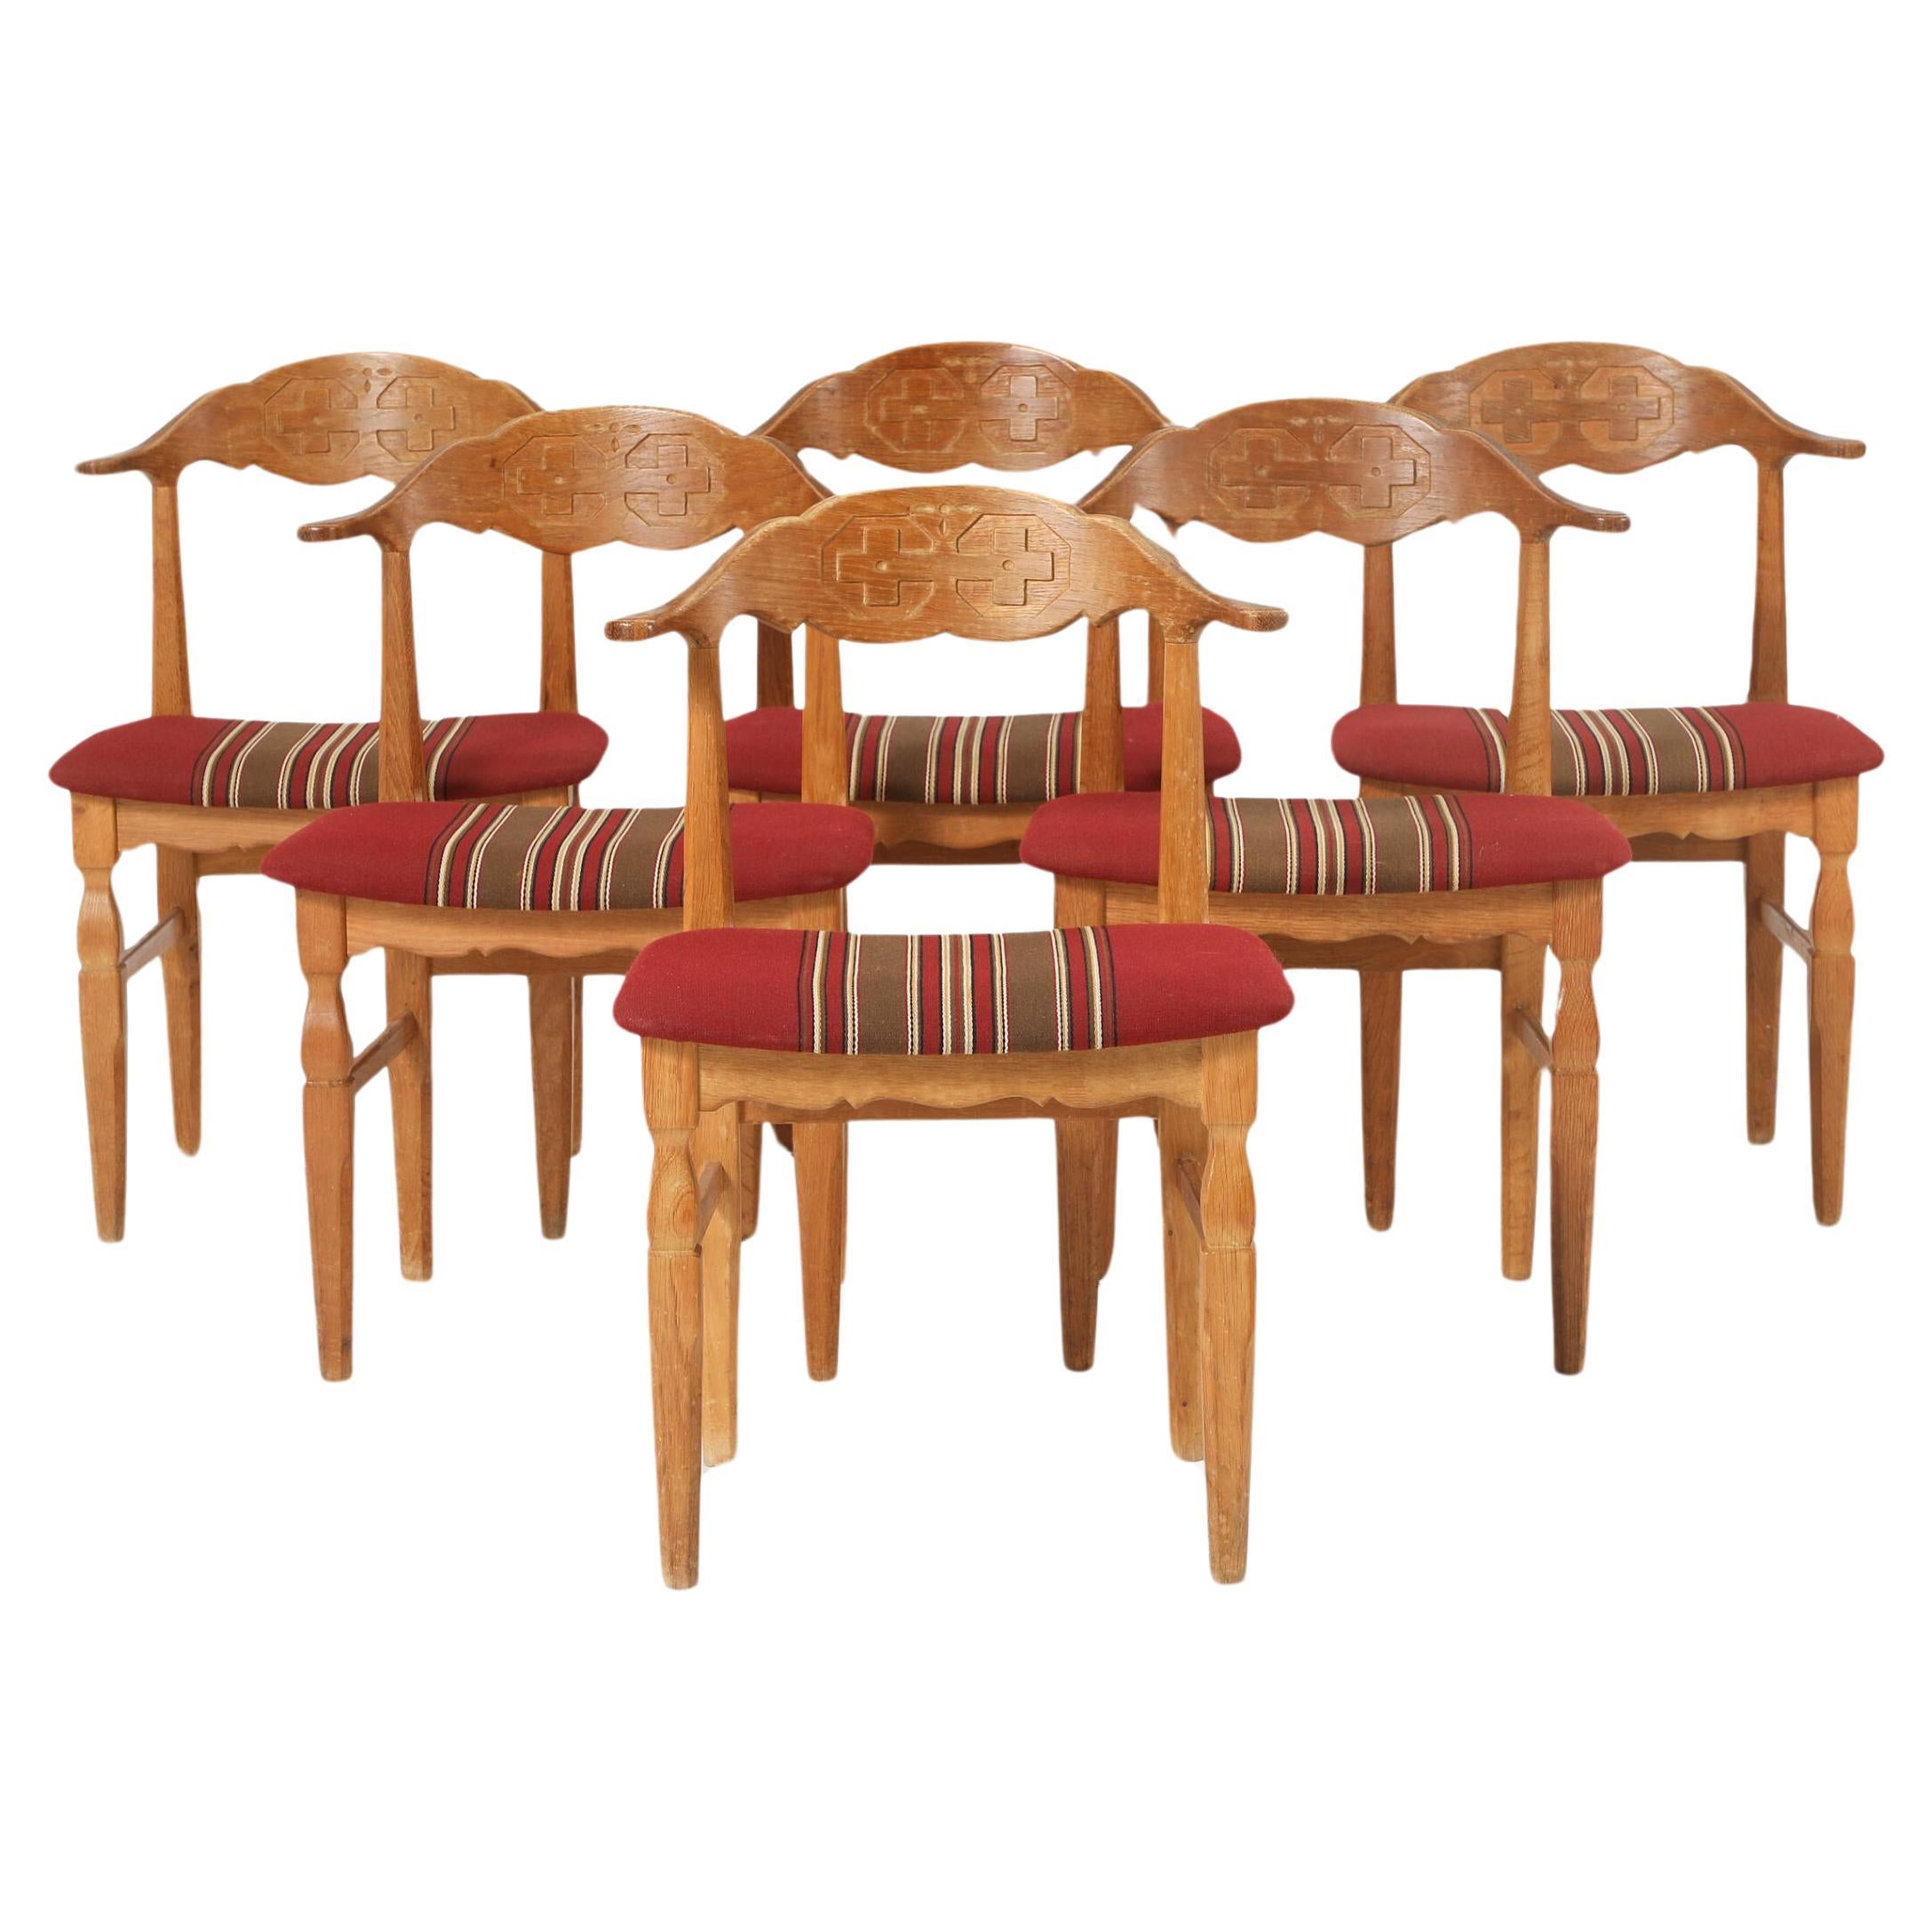 Set of 6 Henry Kjaernulf Dining Chairs For Sale